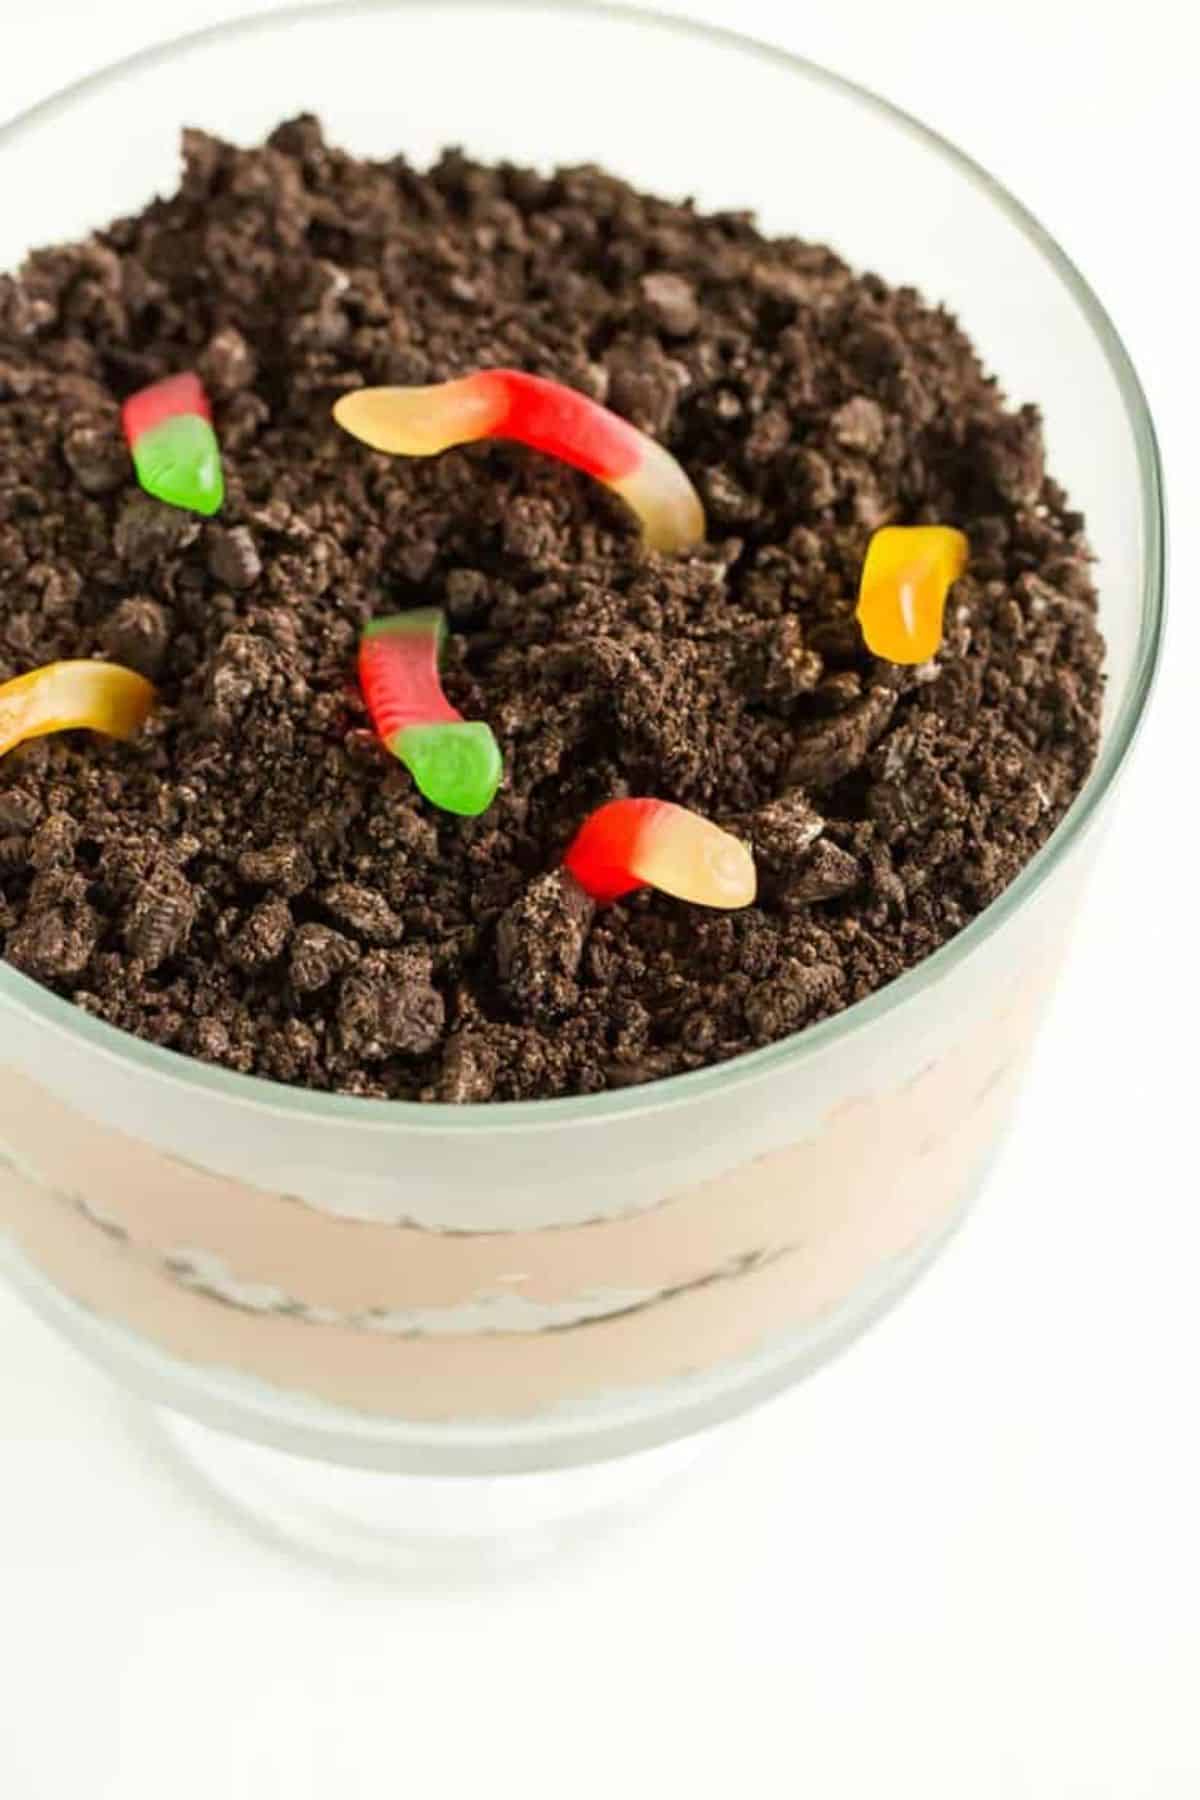 Dirt Dessert with gummy worms in a glass cup.